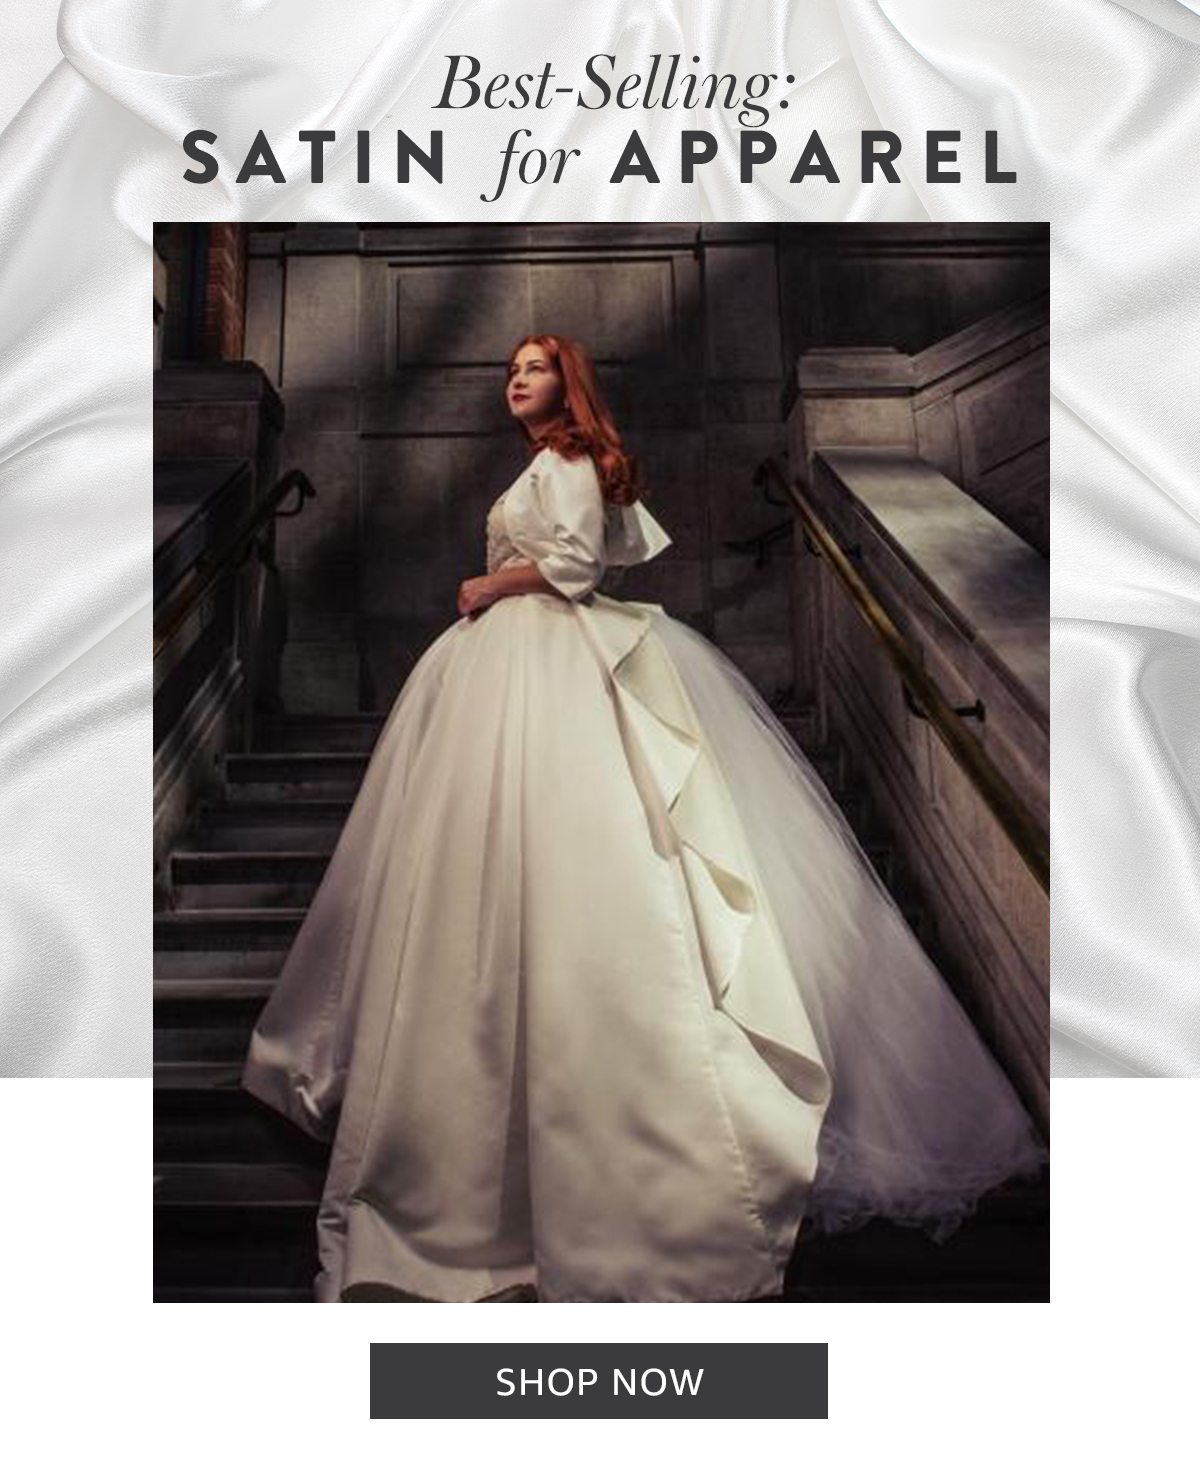 Best-Selling: SATIN for APPAREL | SHOP NOW